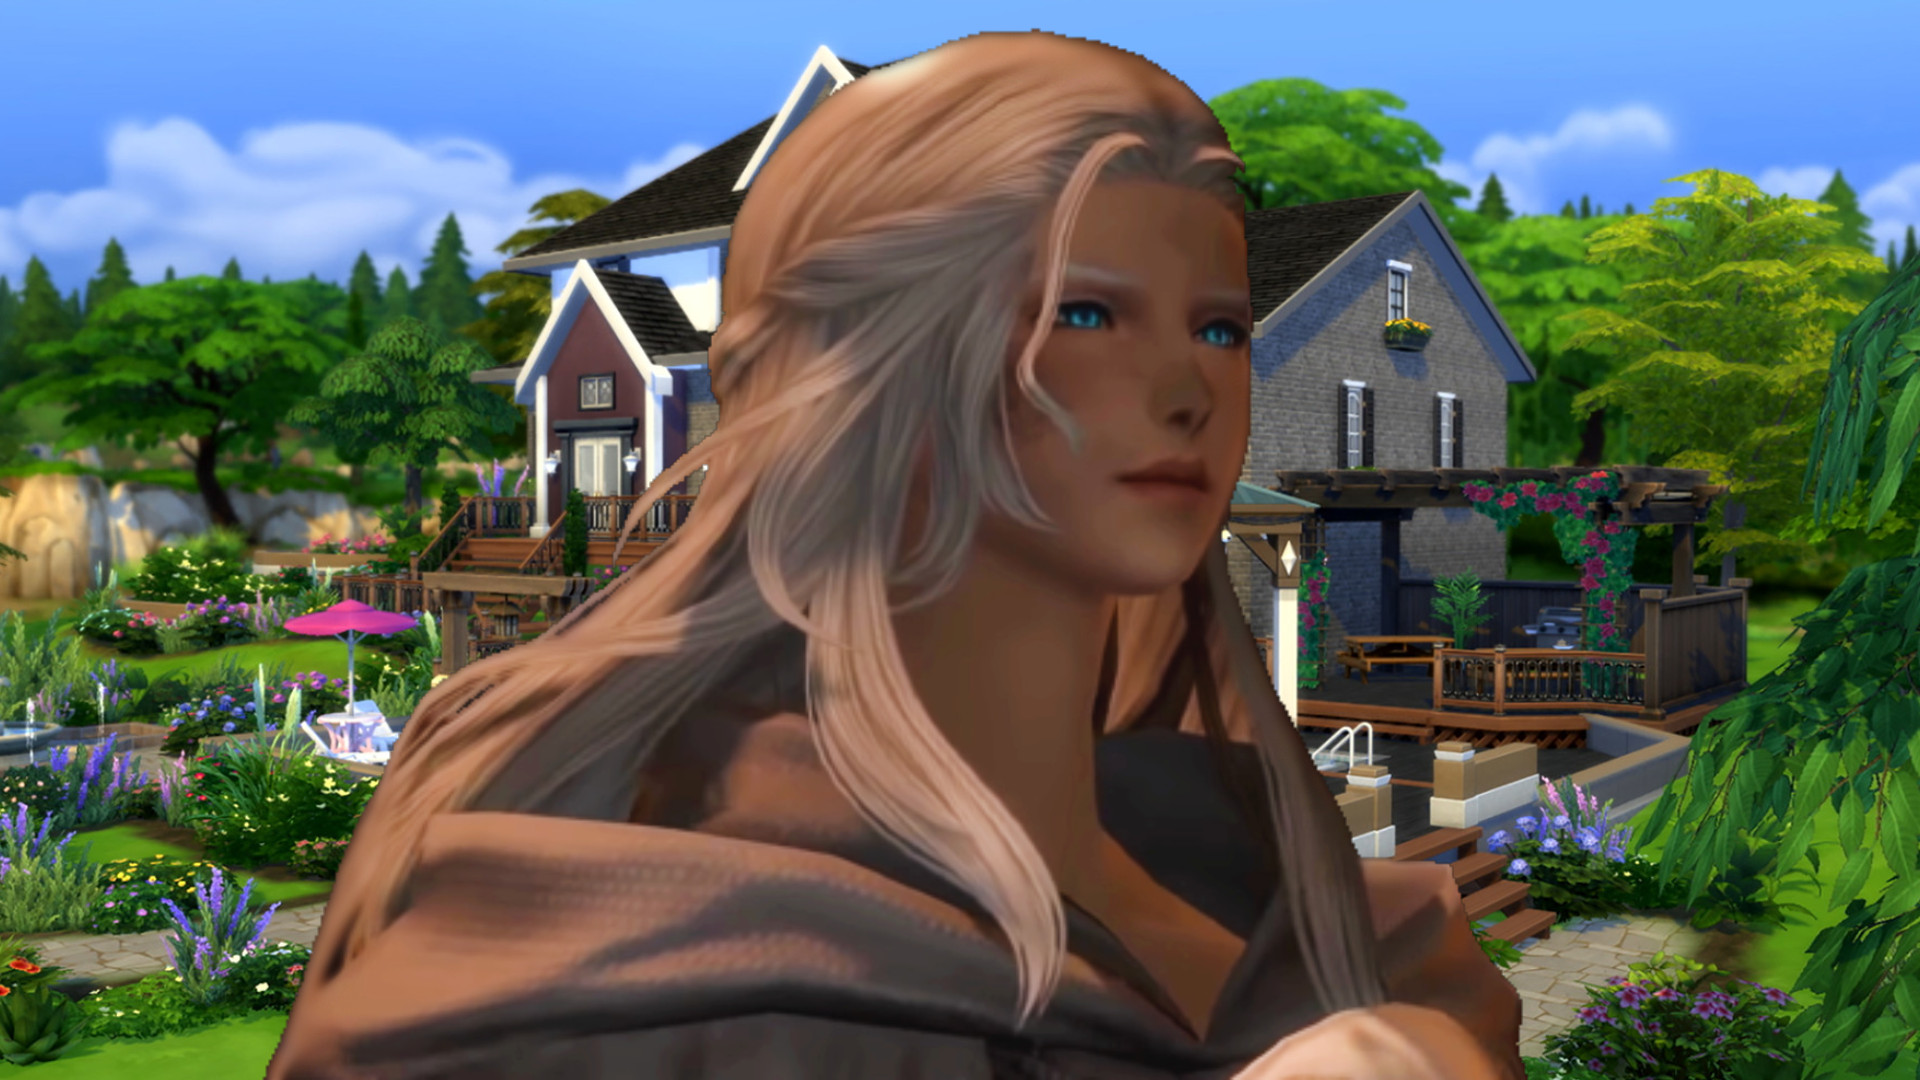 The Sims 4 players spot several sneaky FFXIV references